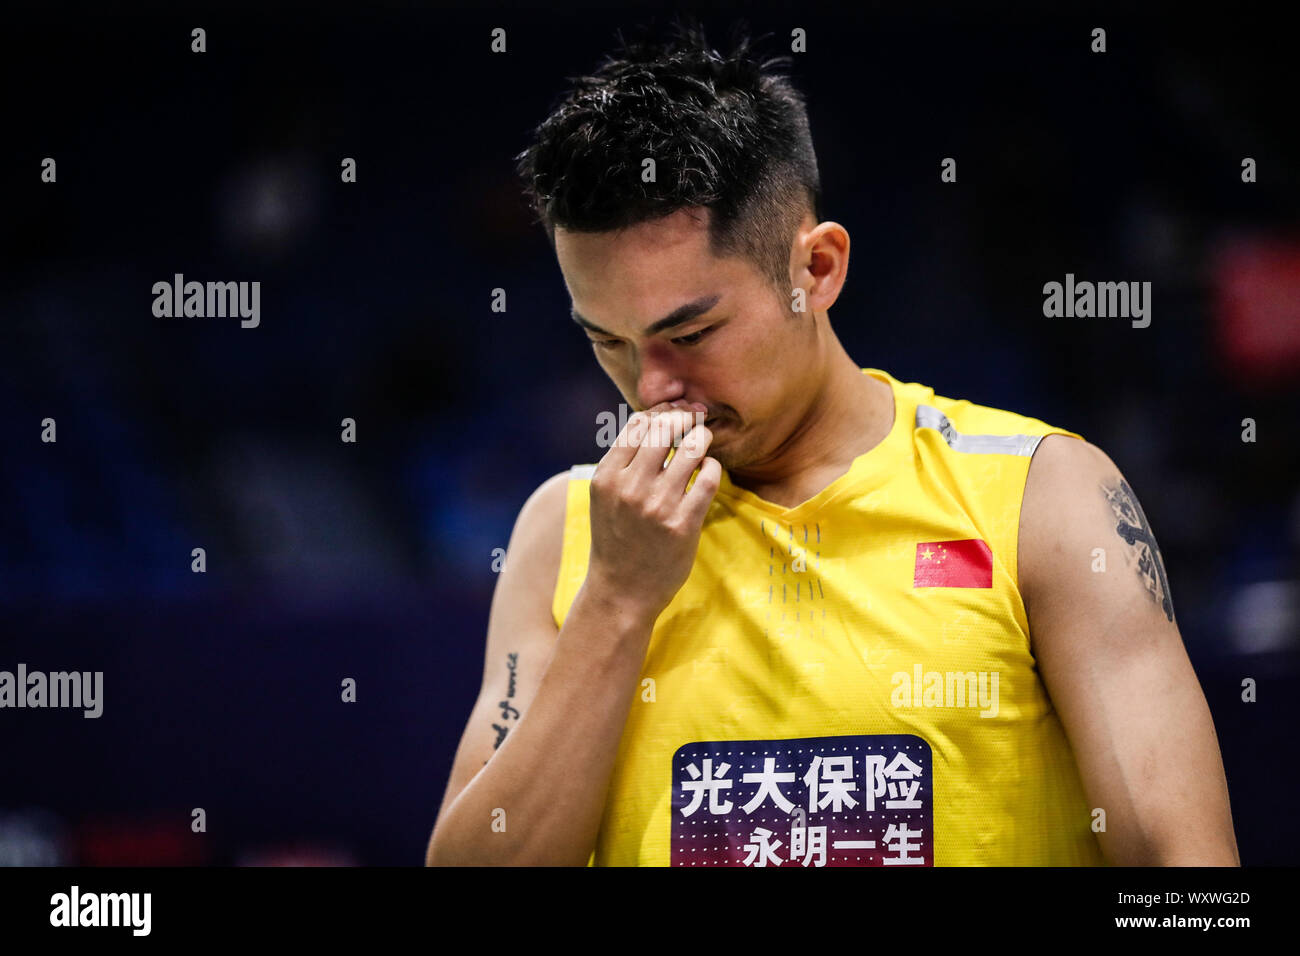 Chinese professional badminton player Lin Dan competes against Japanese professional badminton player Kento Momota at the first round of men's single of VICTOR China Open 2019, in Changzhou city, east China's Jiangsu province, 17 September 2019. Chinese professional badminton player Lin Dan was defeated by Japanese professional badminton player Kento Momota with 0-2 at the first round of men's single of VICTOR China Open 2019, in Changzhou city, east China's Jiangsu province, 17 September 2019. Stock Photo